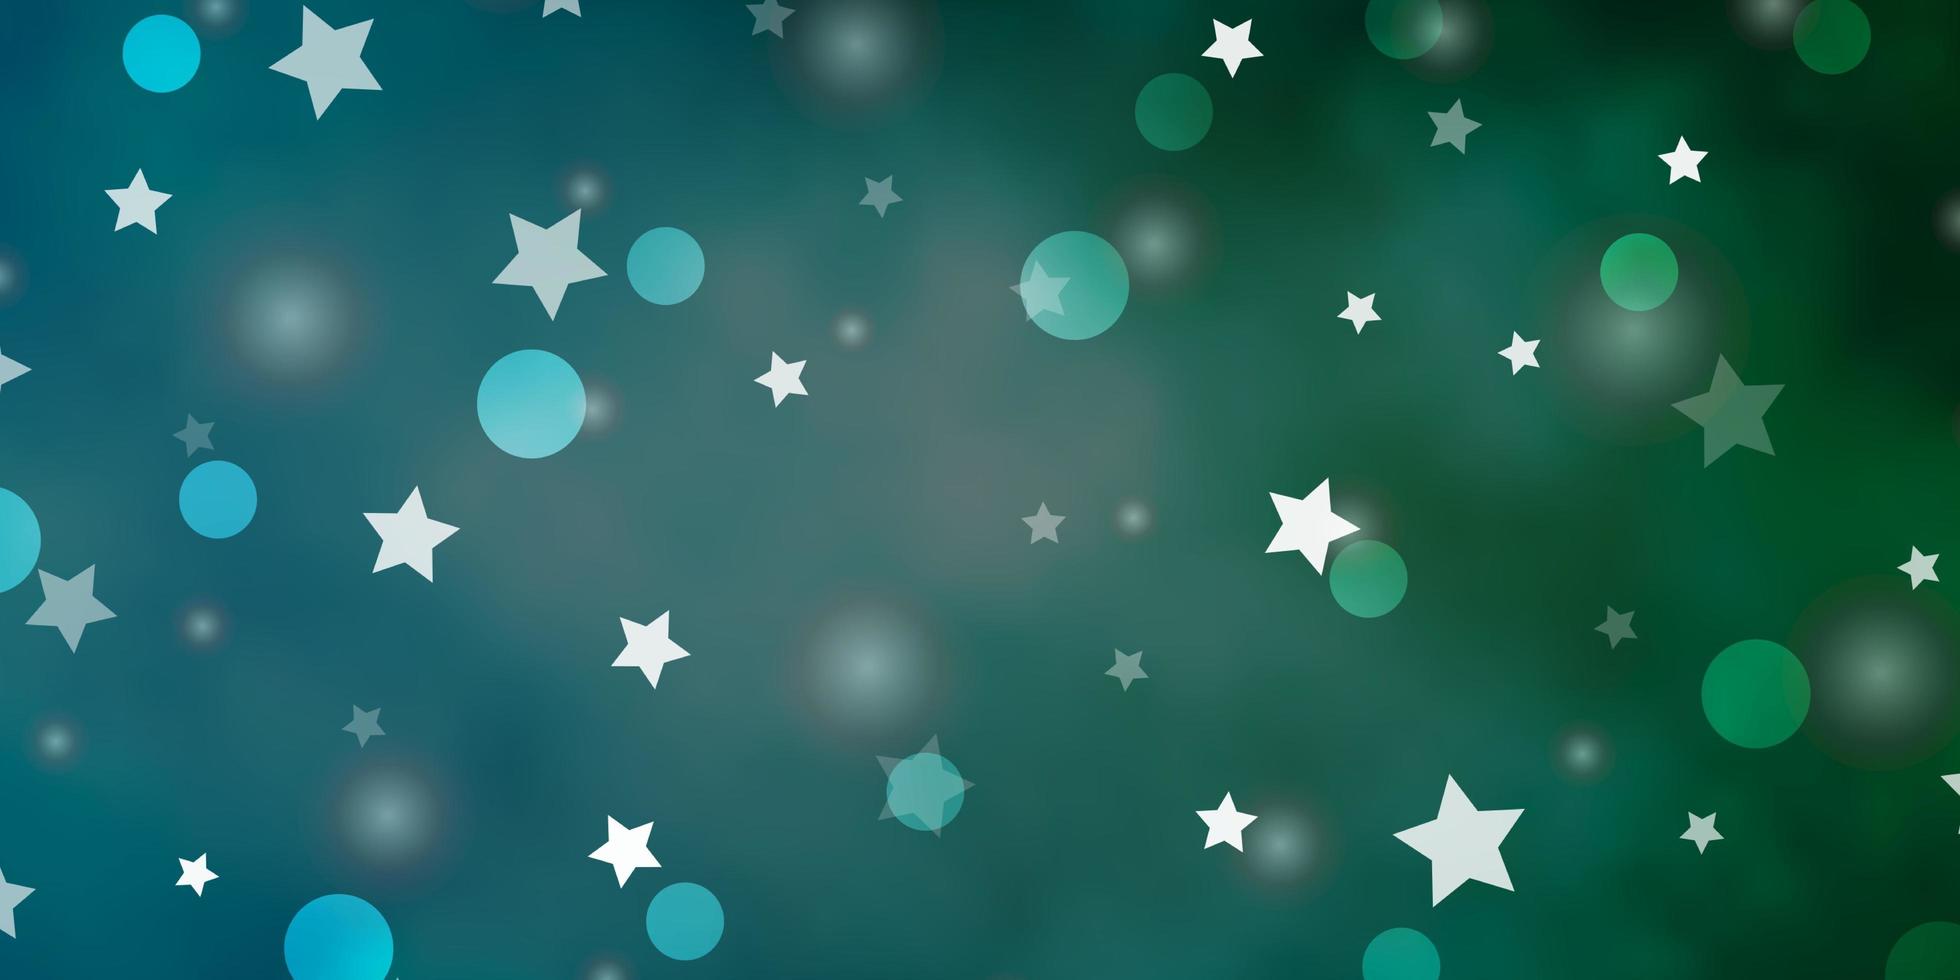 Light Blue Green vector backdrop with circles stars